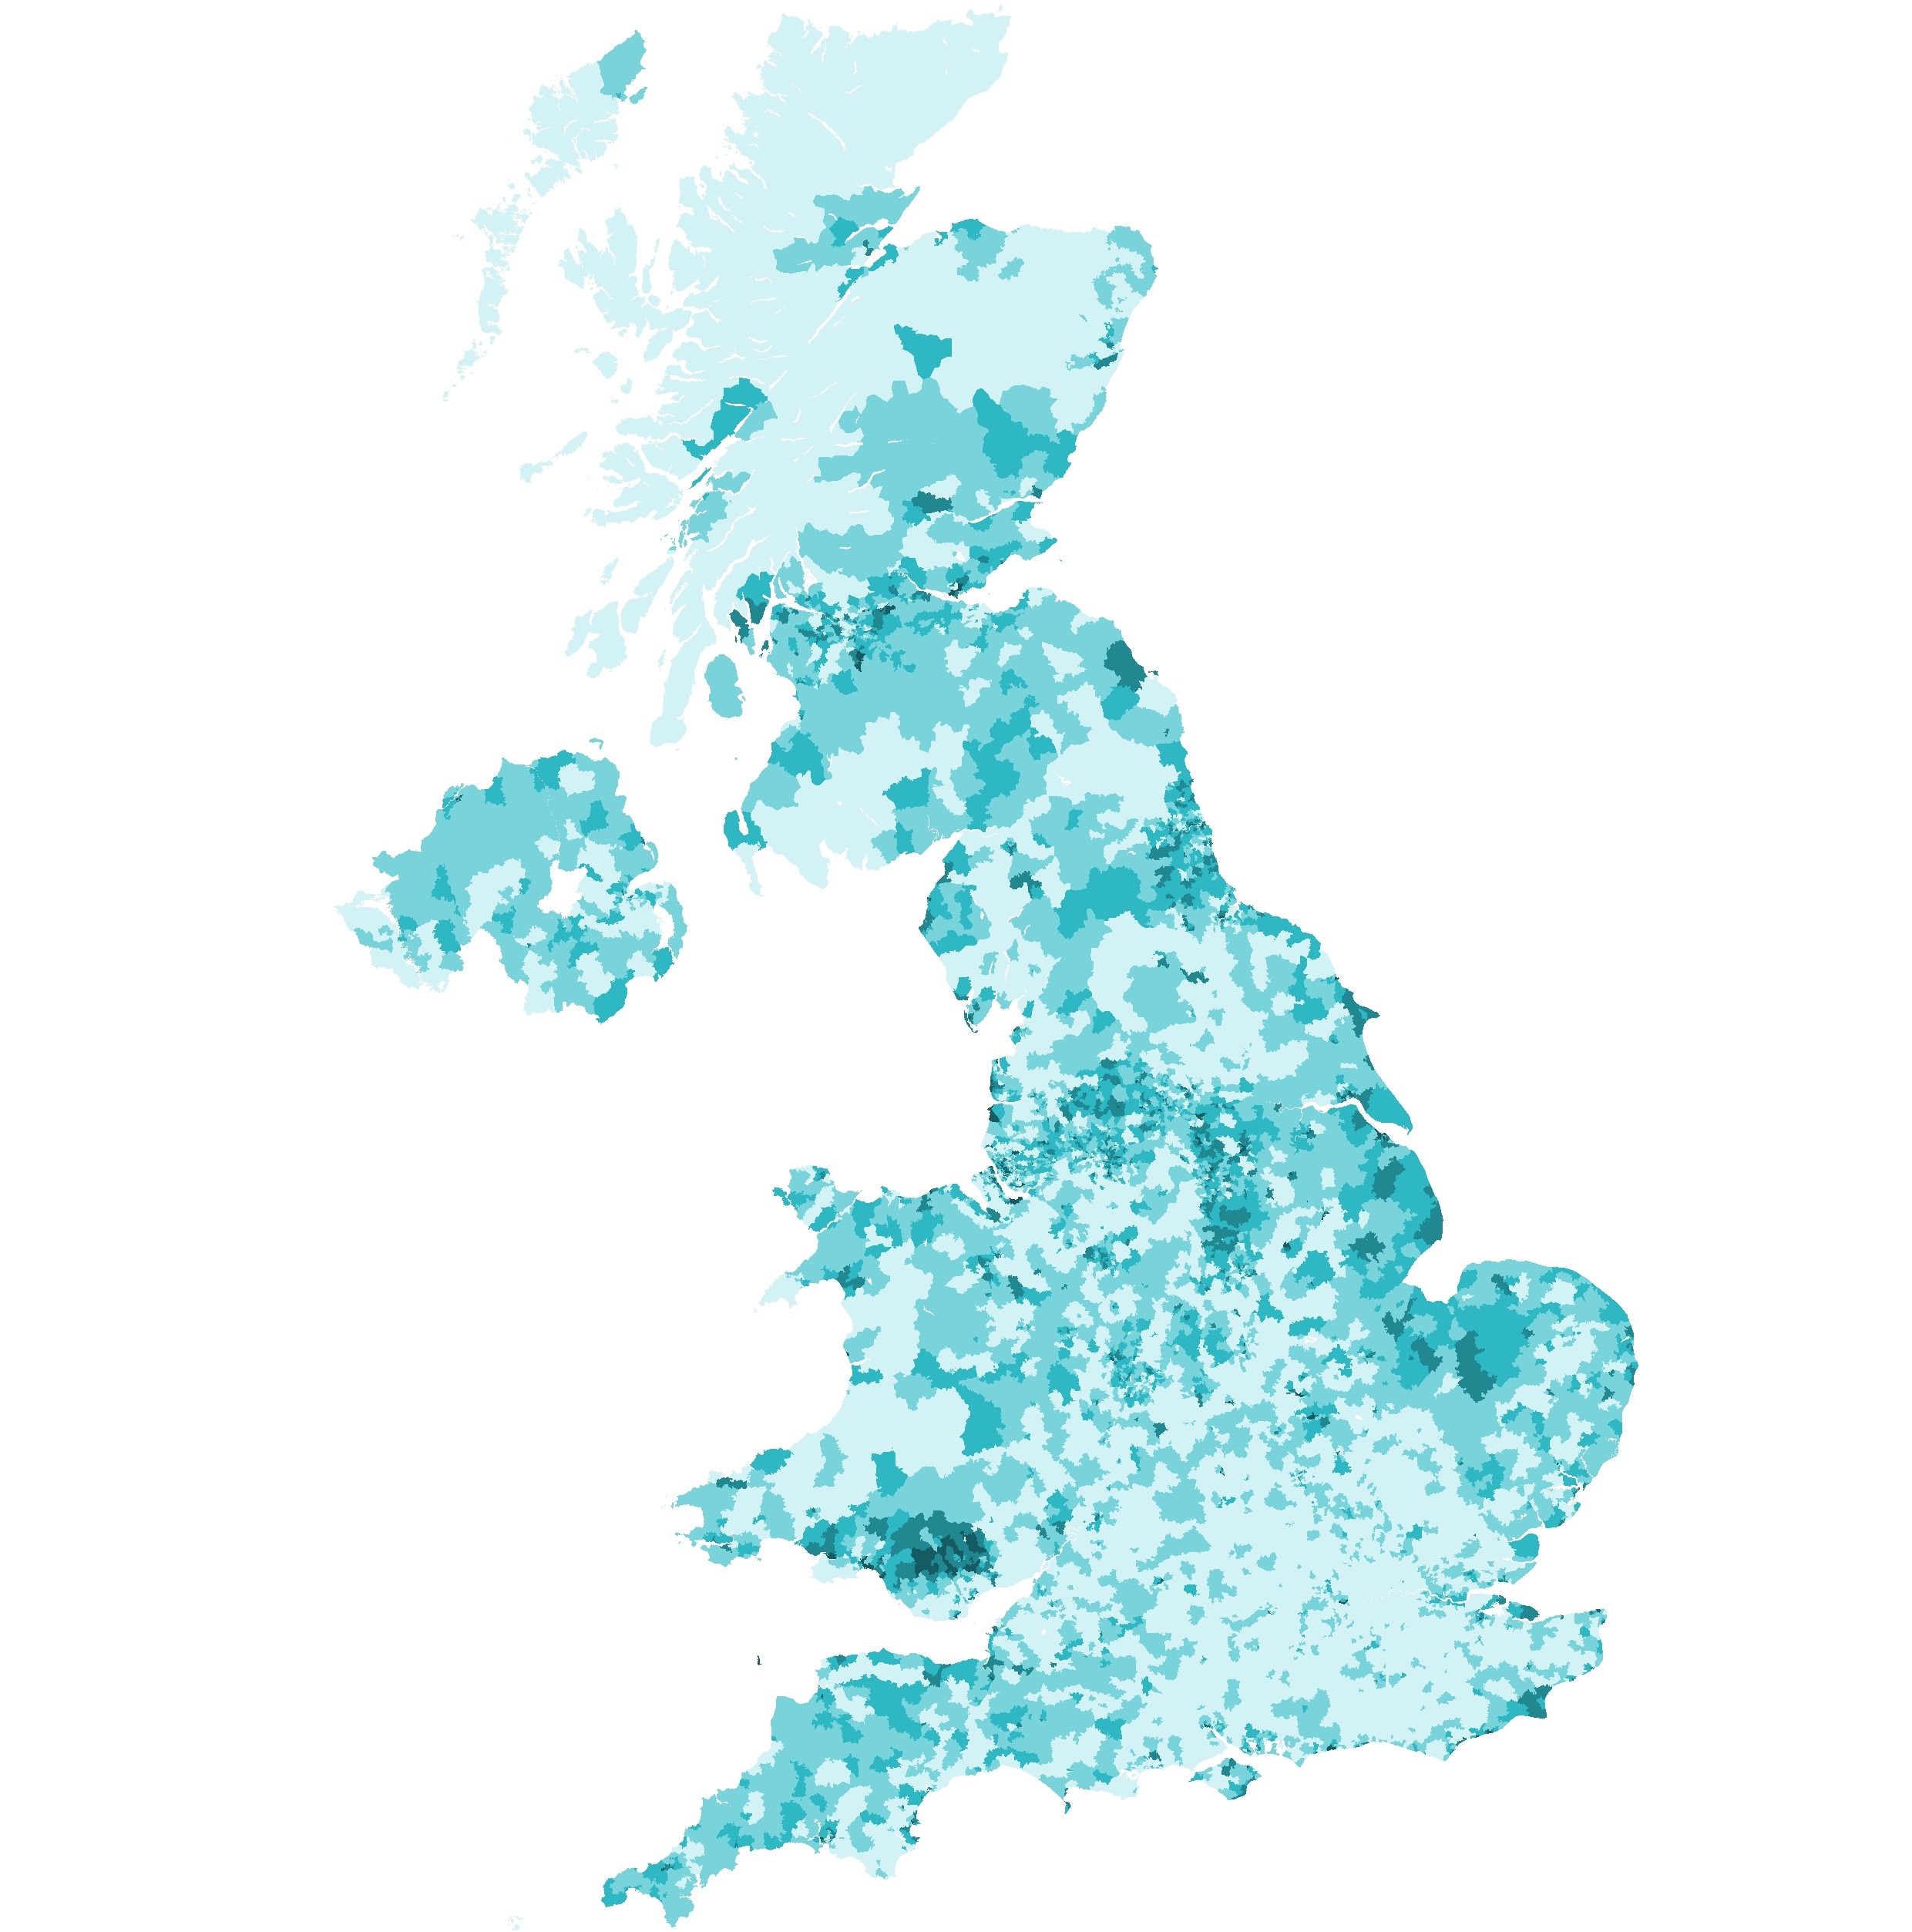 A heatmap of the UK showing uneven distribution of this segment around most of the UK, with darker concentrations around North West towns and south Wales, whilst much lighter in the whole of the South of England